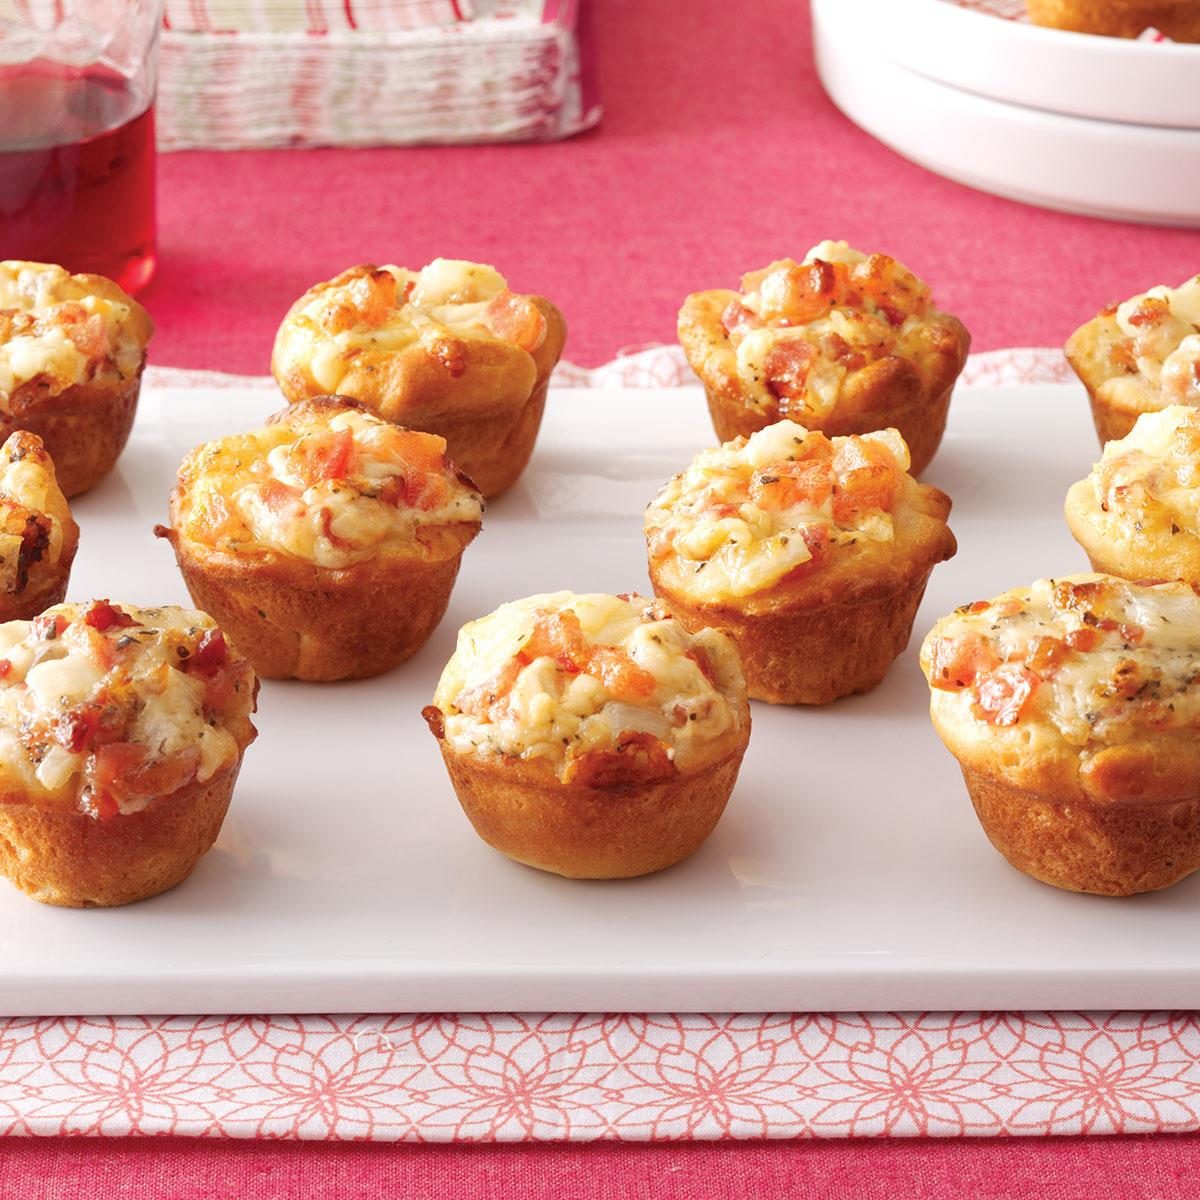 Tomato Bacon Cups Recipe: How to Make It